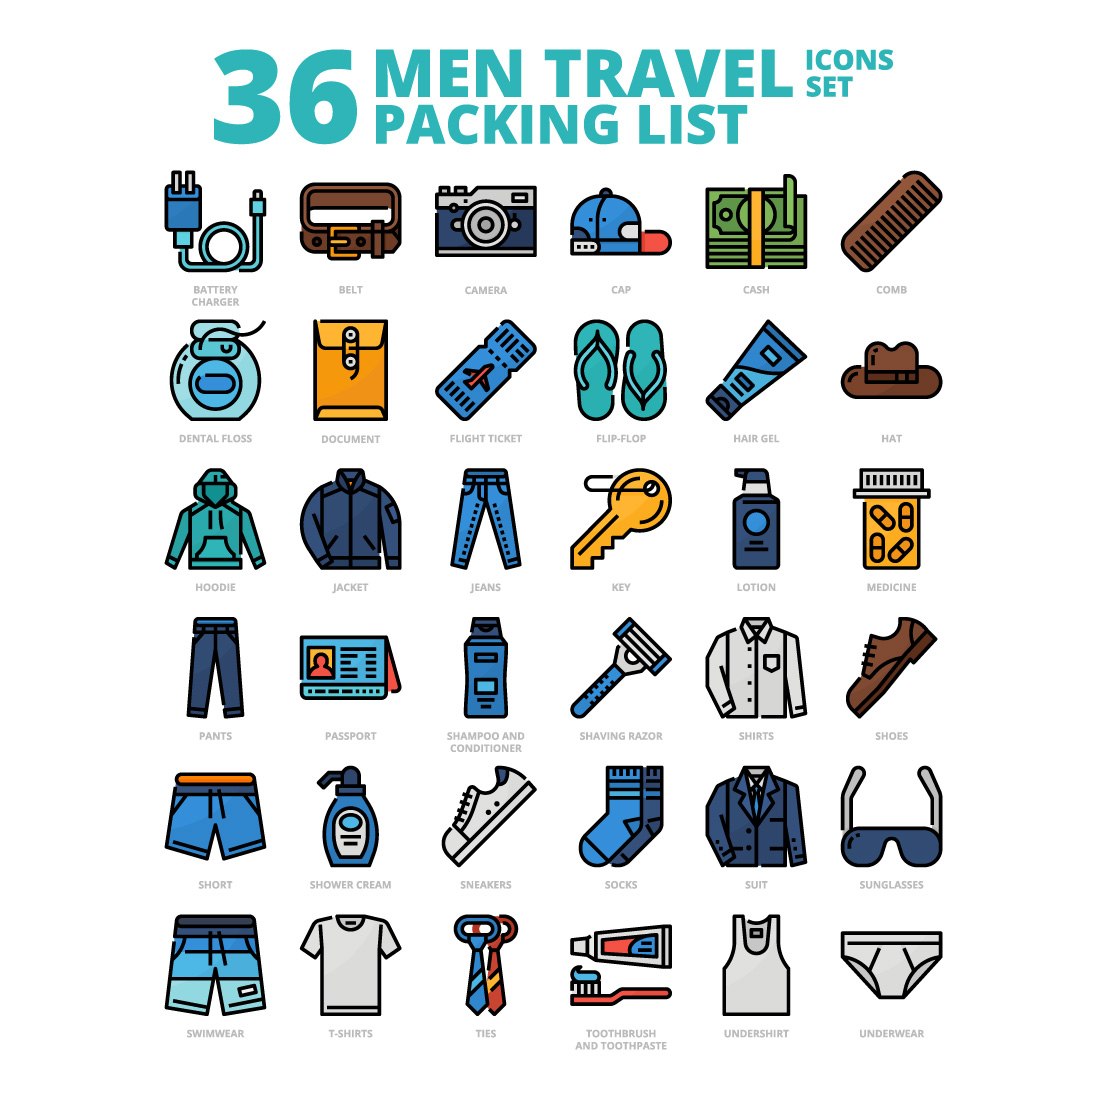 36 Men Travel Packing List Icons Set x 4 Styles cover image.